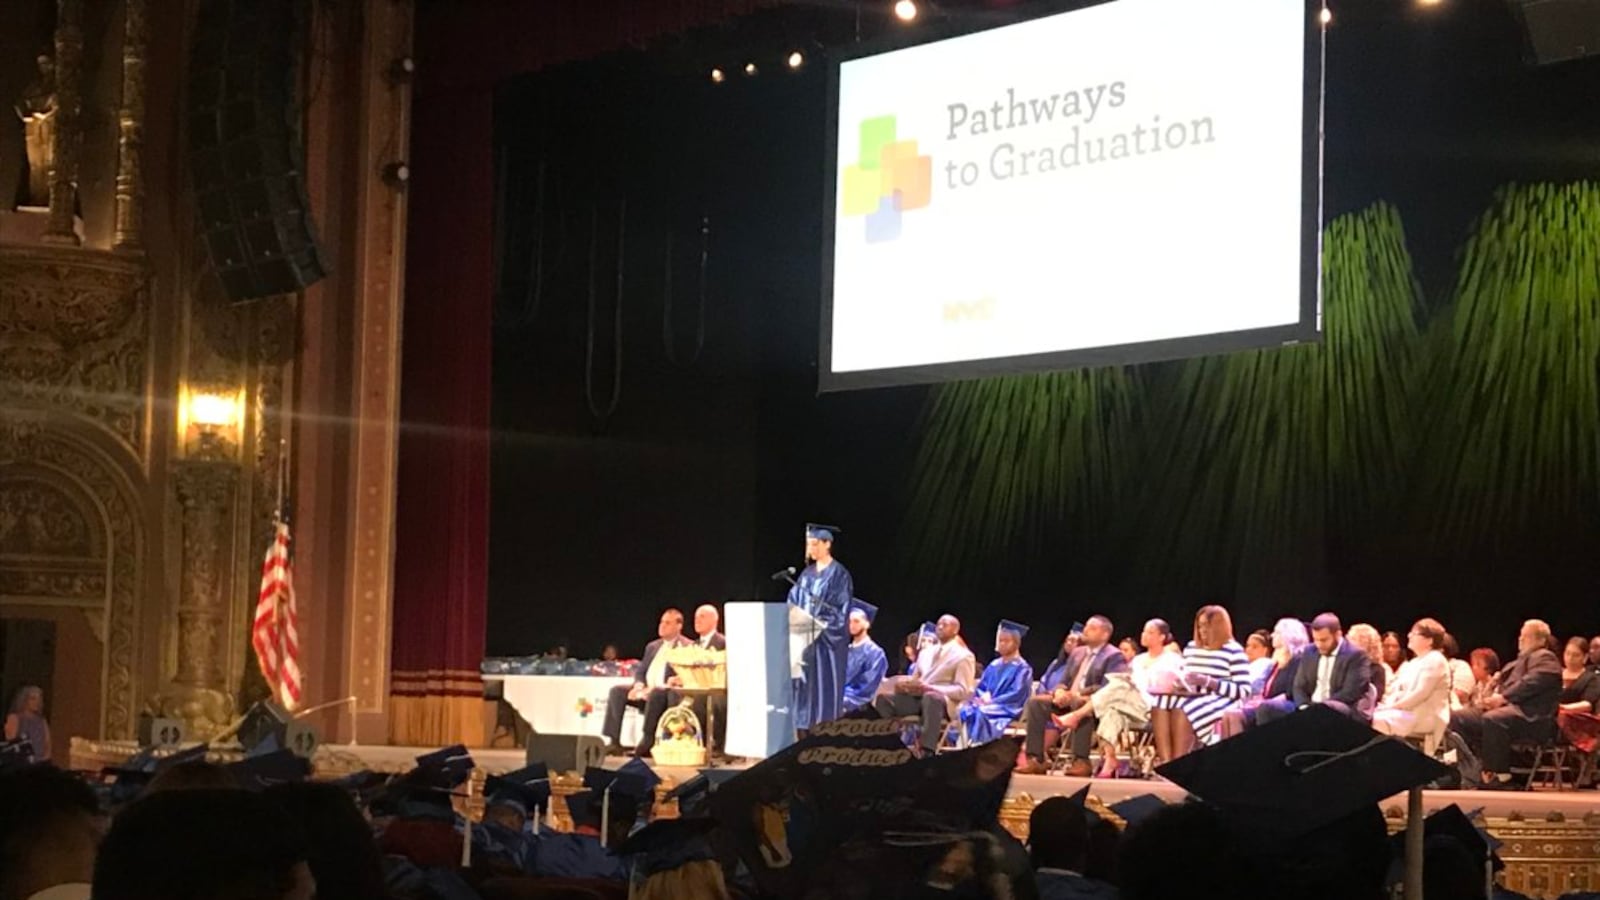 A student speaks to a crowd of graduates during the 2019 Pathways to Graduation ceremony in Harlem.